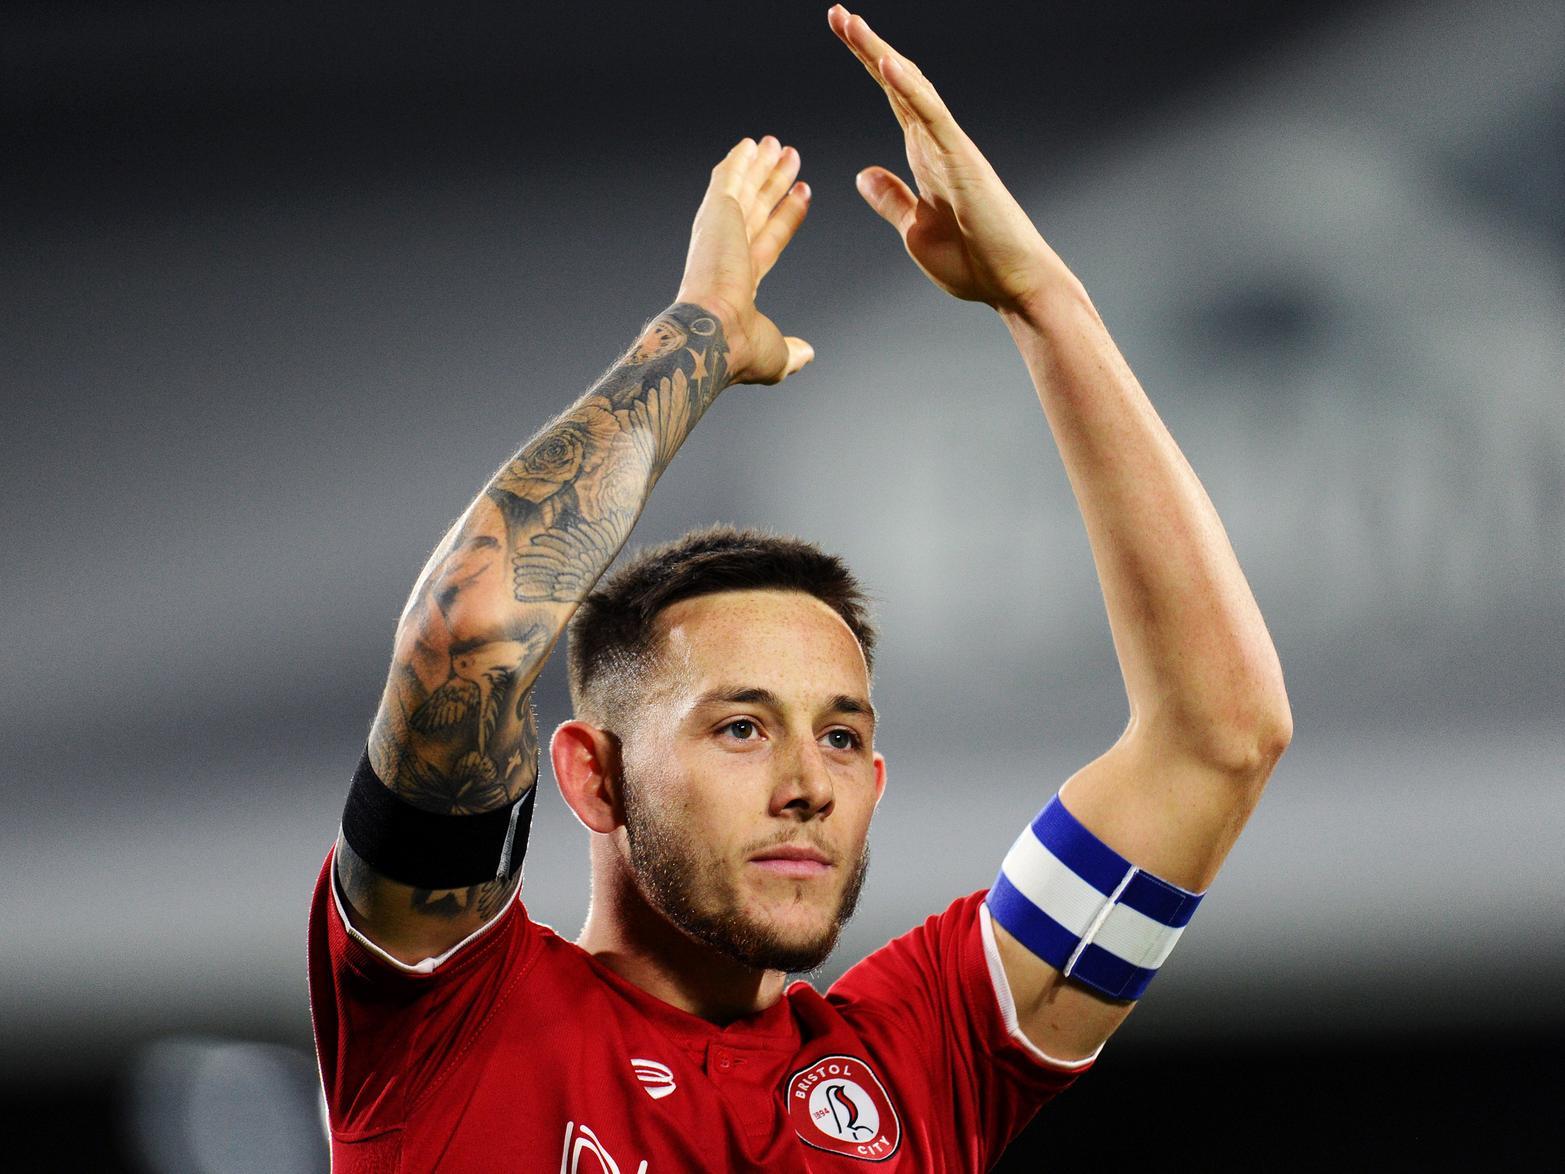 Burnley look set to snap up Bristol City skipper Josh Brownhill, with their striker Nahki Wells moving the other way in a swap plus cash deal between the two sides. (BBC Sport)